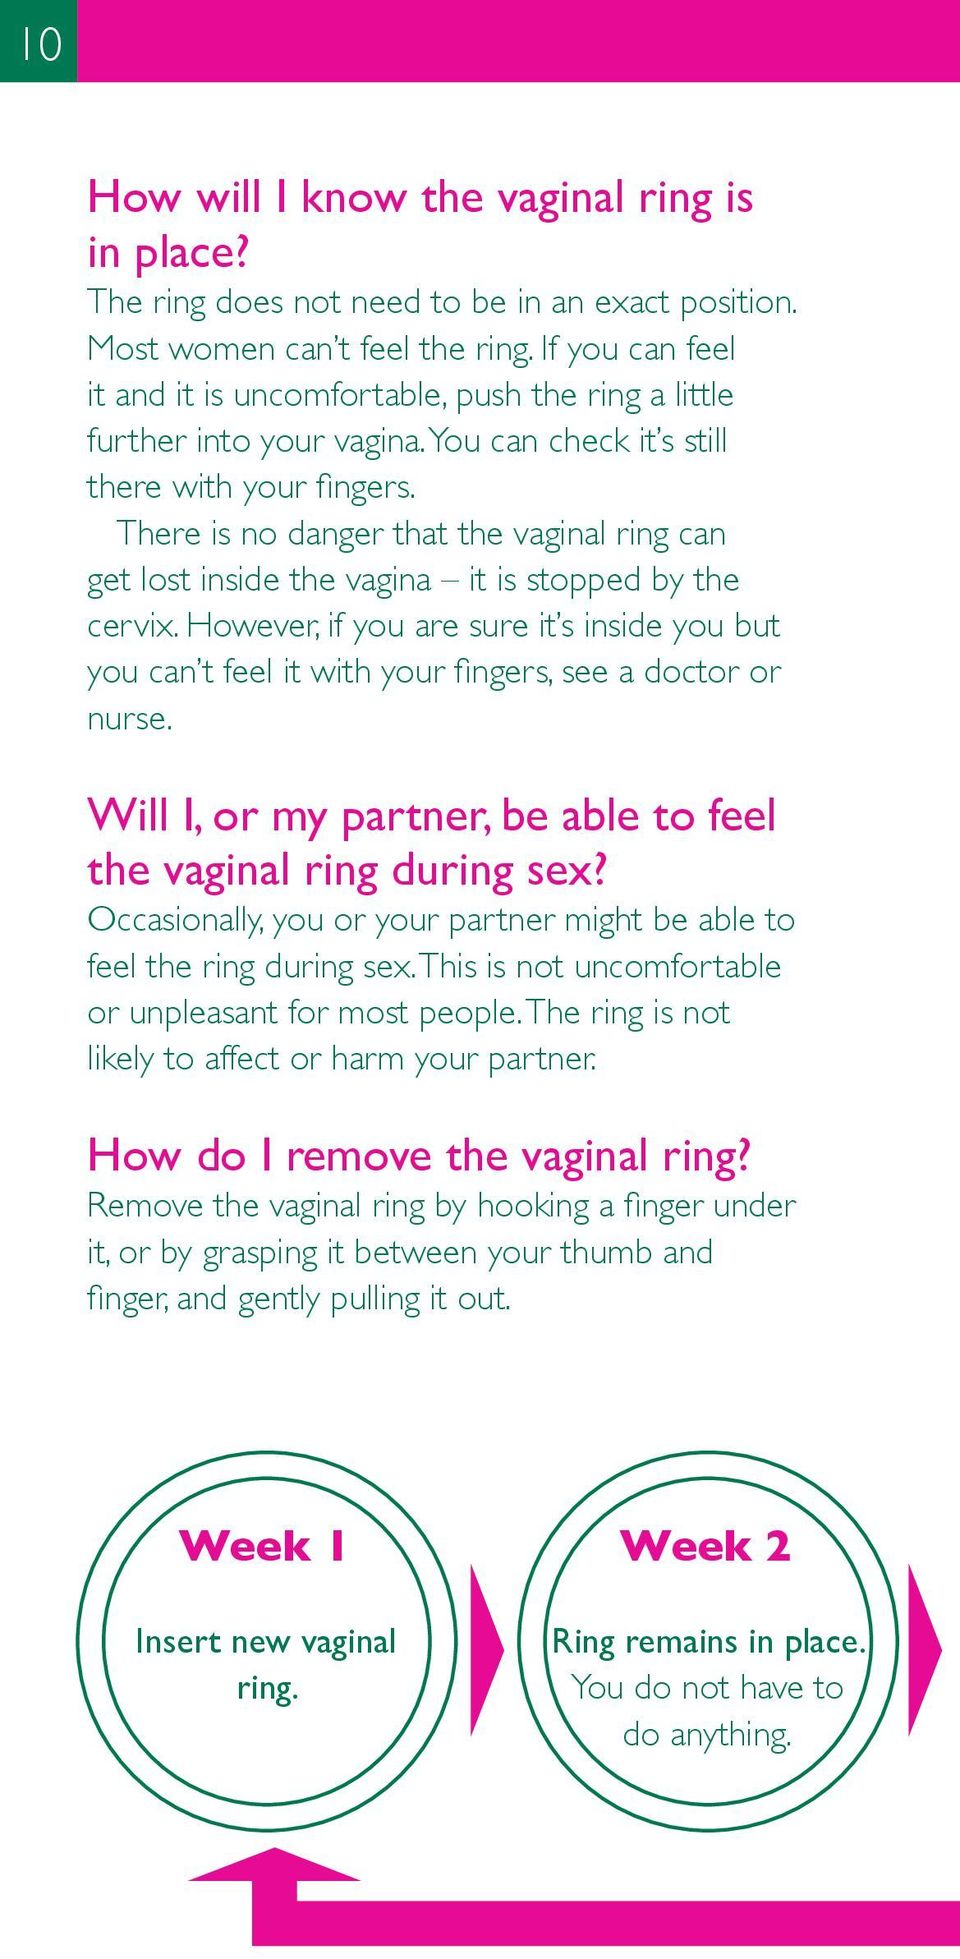 There is no danger that the vaginal ring can get lost inside the vagina it is stopped by the cervix.